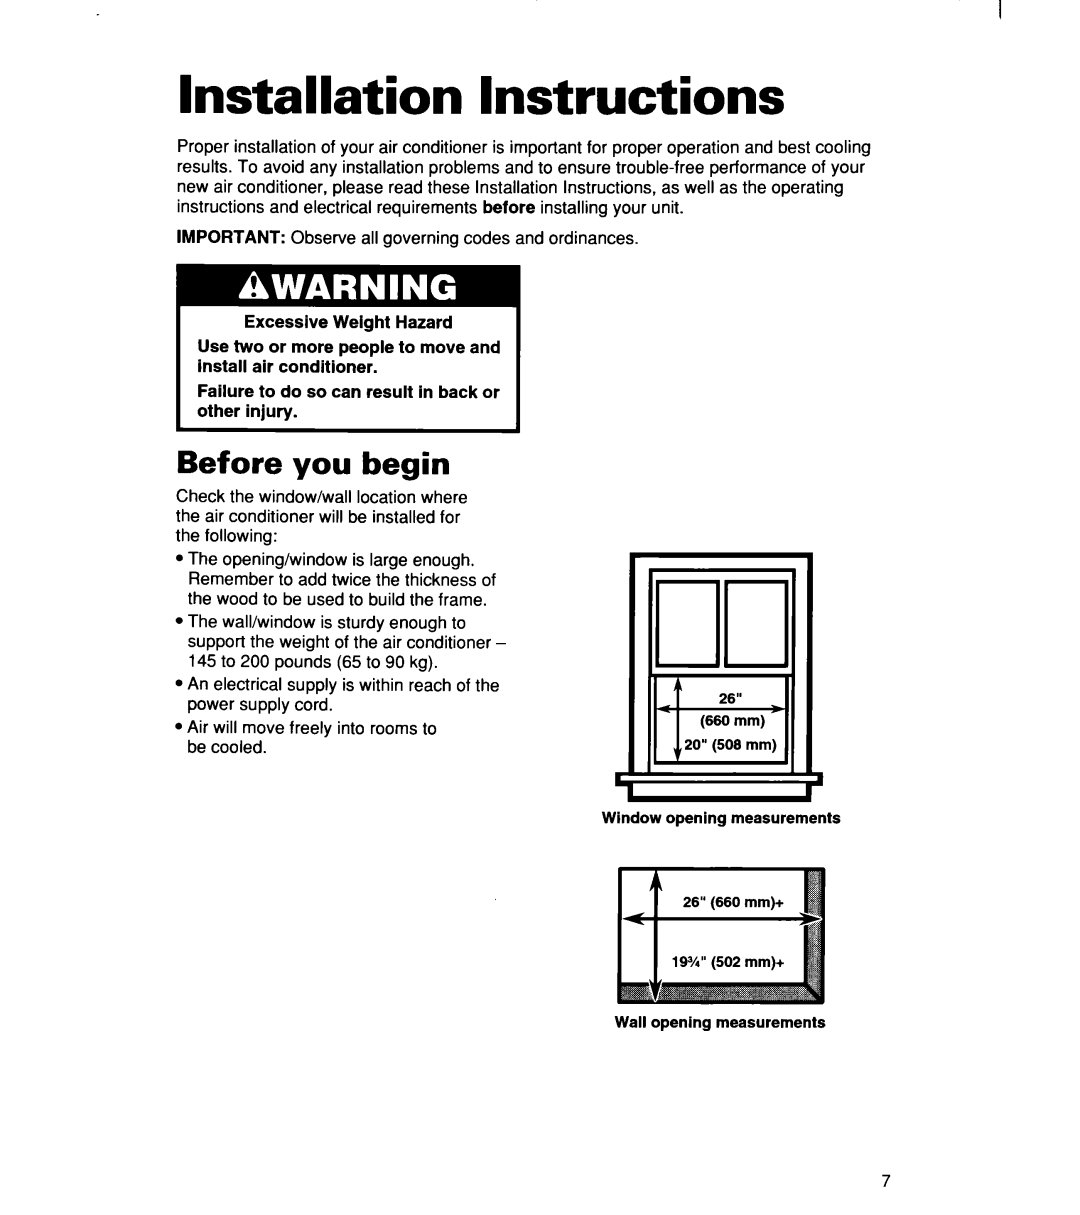 Whirlpool ACM244XE0, ACM 152XE0, ACM184XE0 important safety instructions Installation Instructions, Before you begin 